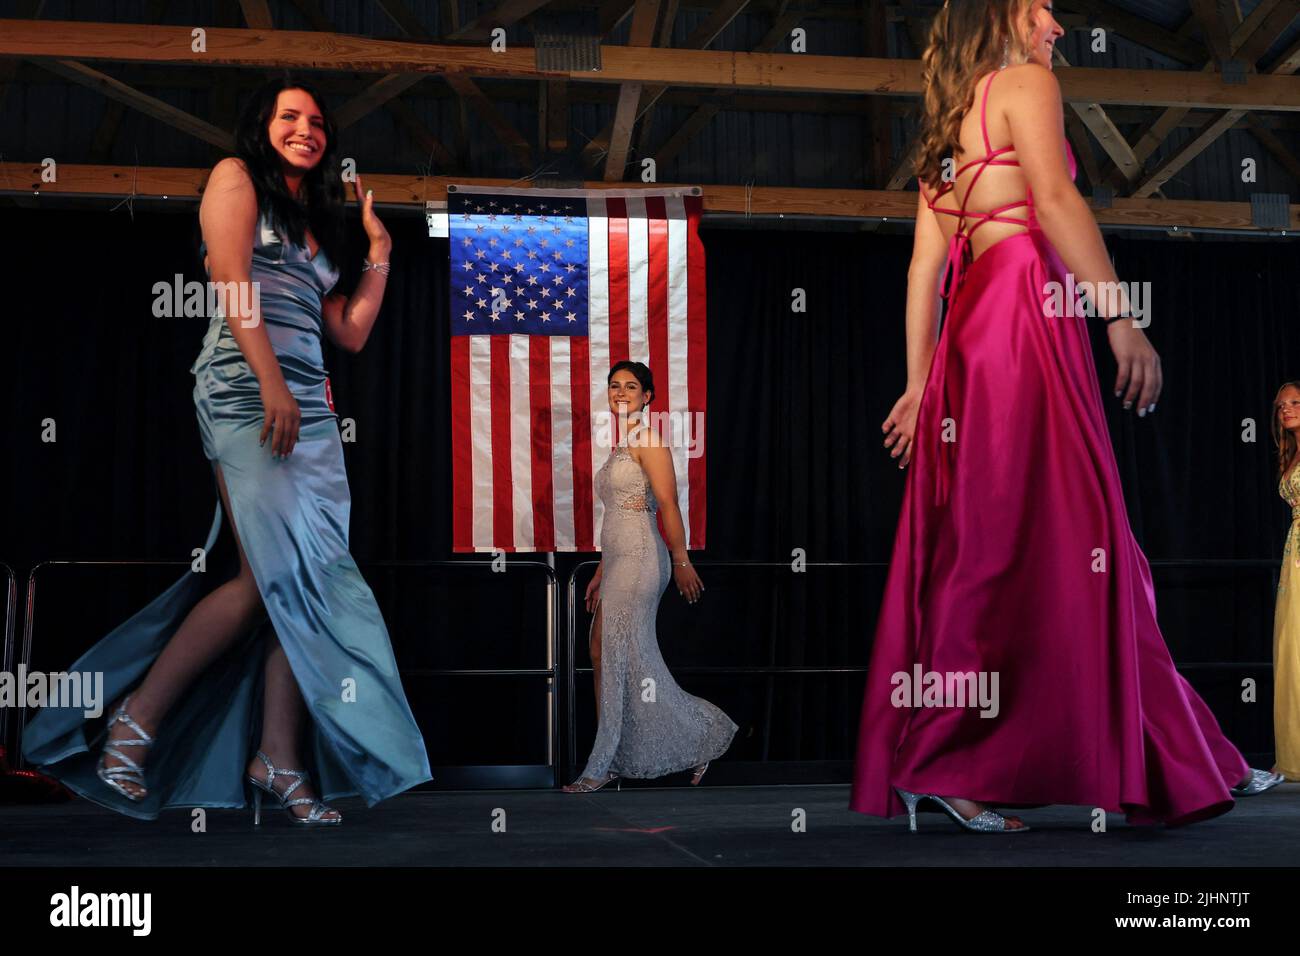 Women compete in a beauty pageant at the 2022 Saratoga County Fair in Ballston Spa, New York, U.S., July 19, 2022. REUTERS/Shannon Stapleton Stock Photo